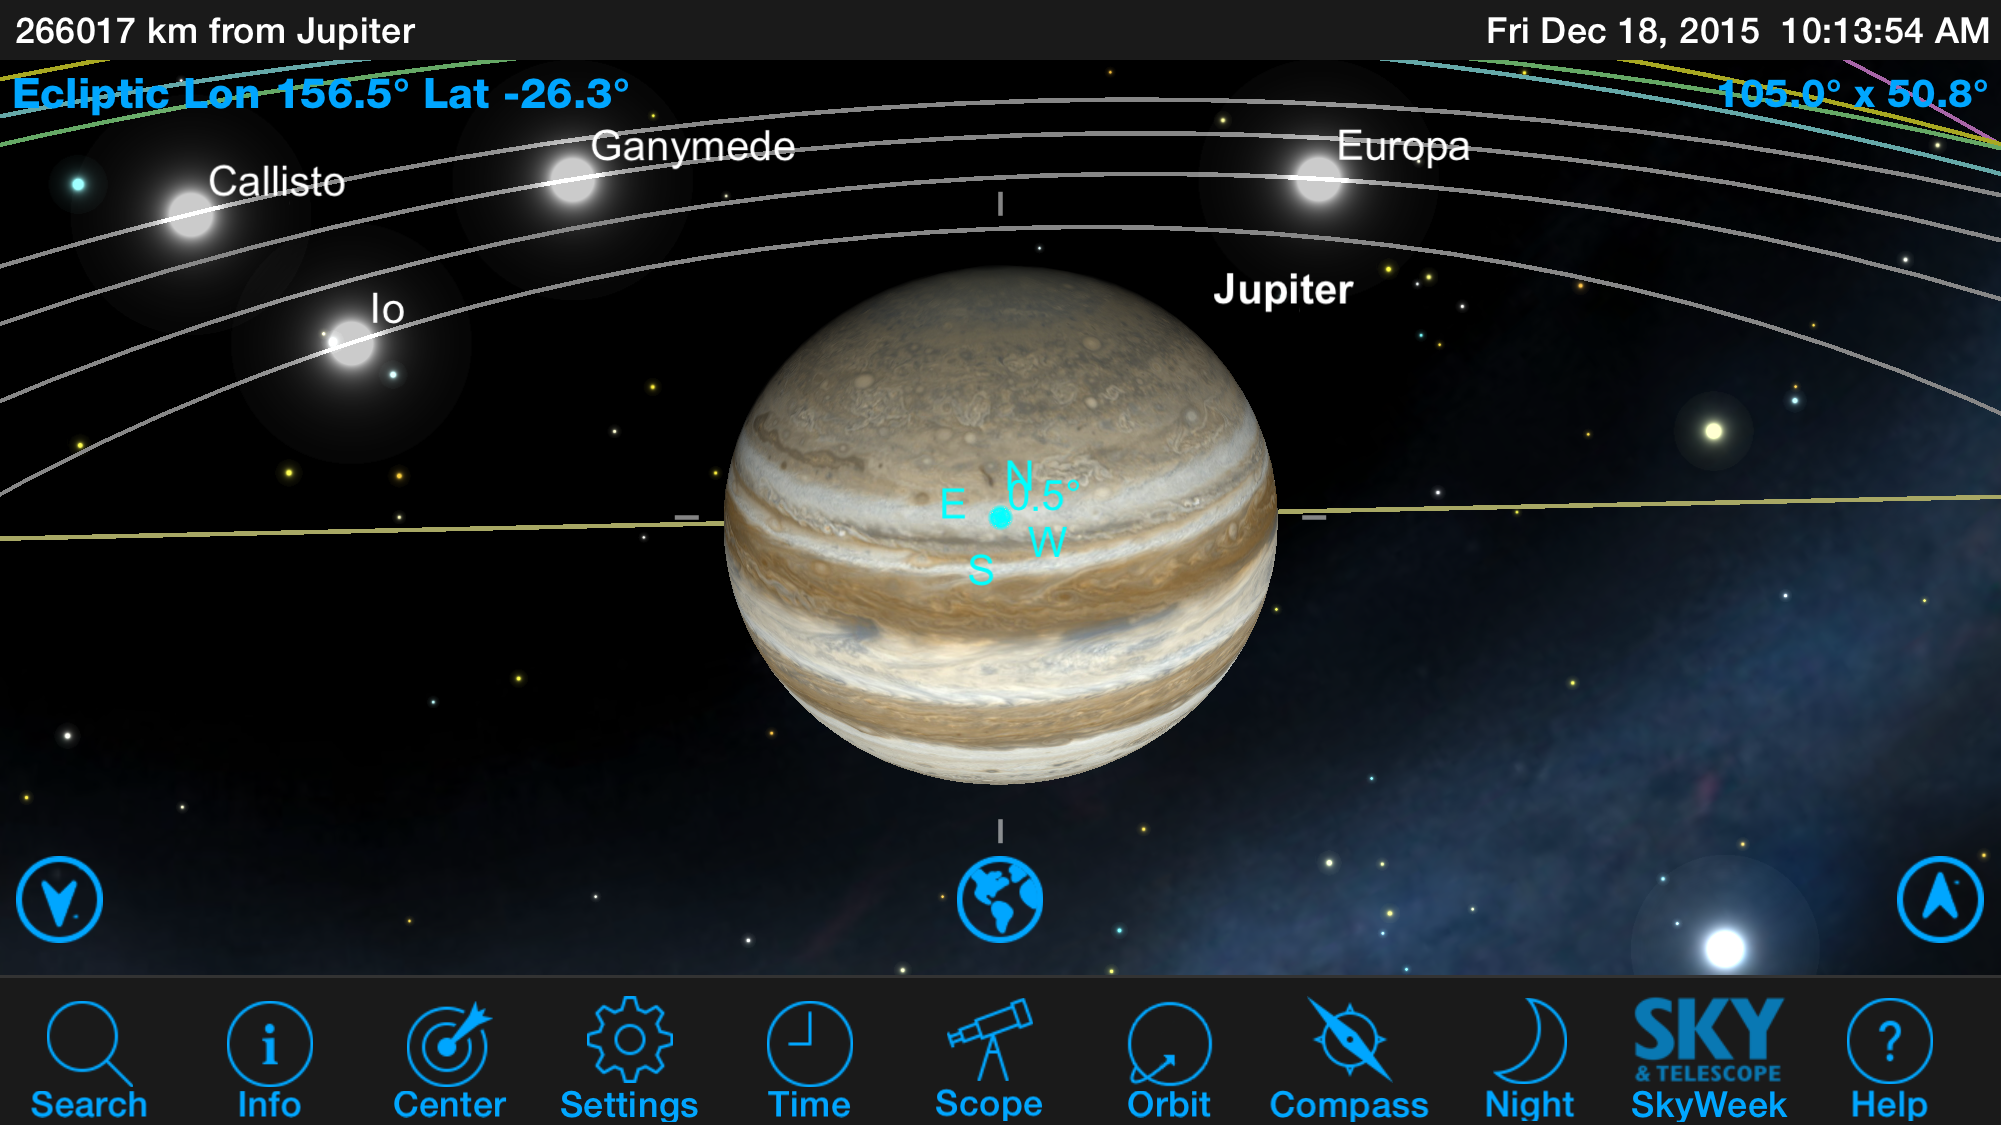 Leave Earth and explore Jupiter, it moons, and other solar system objects from orbit